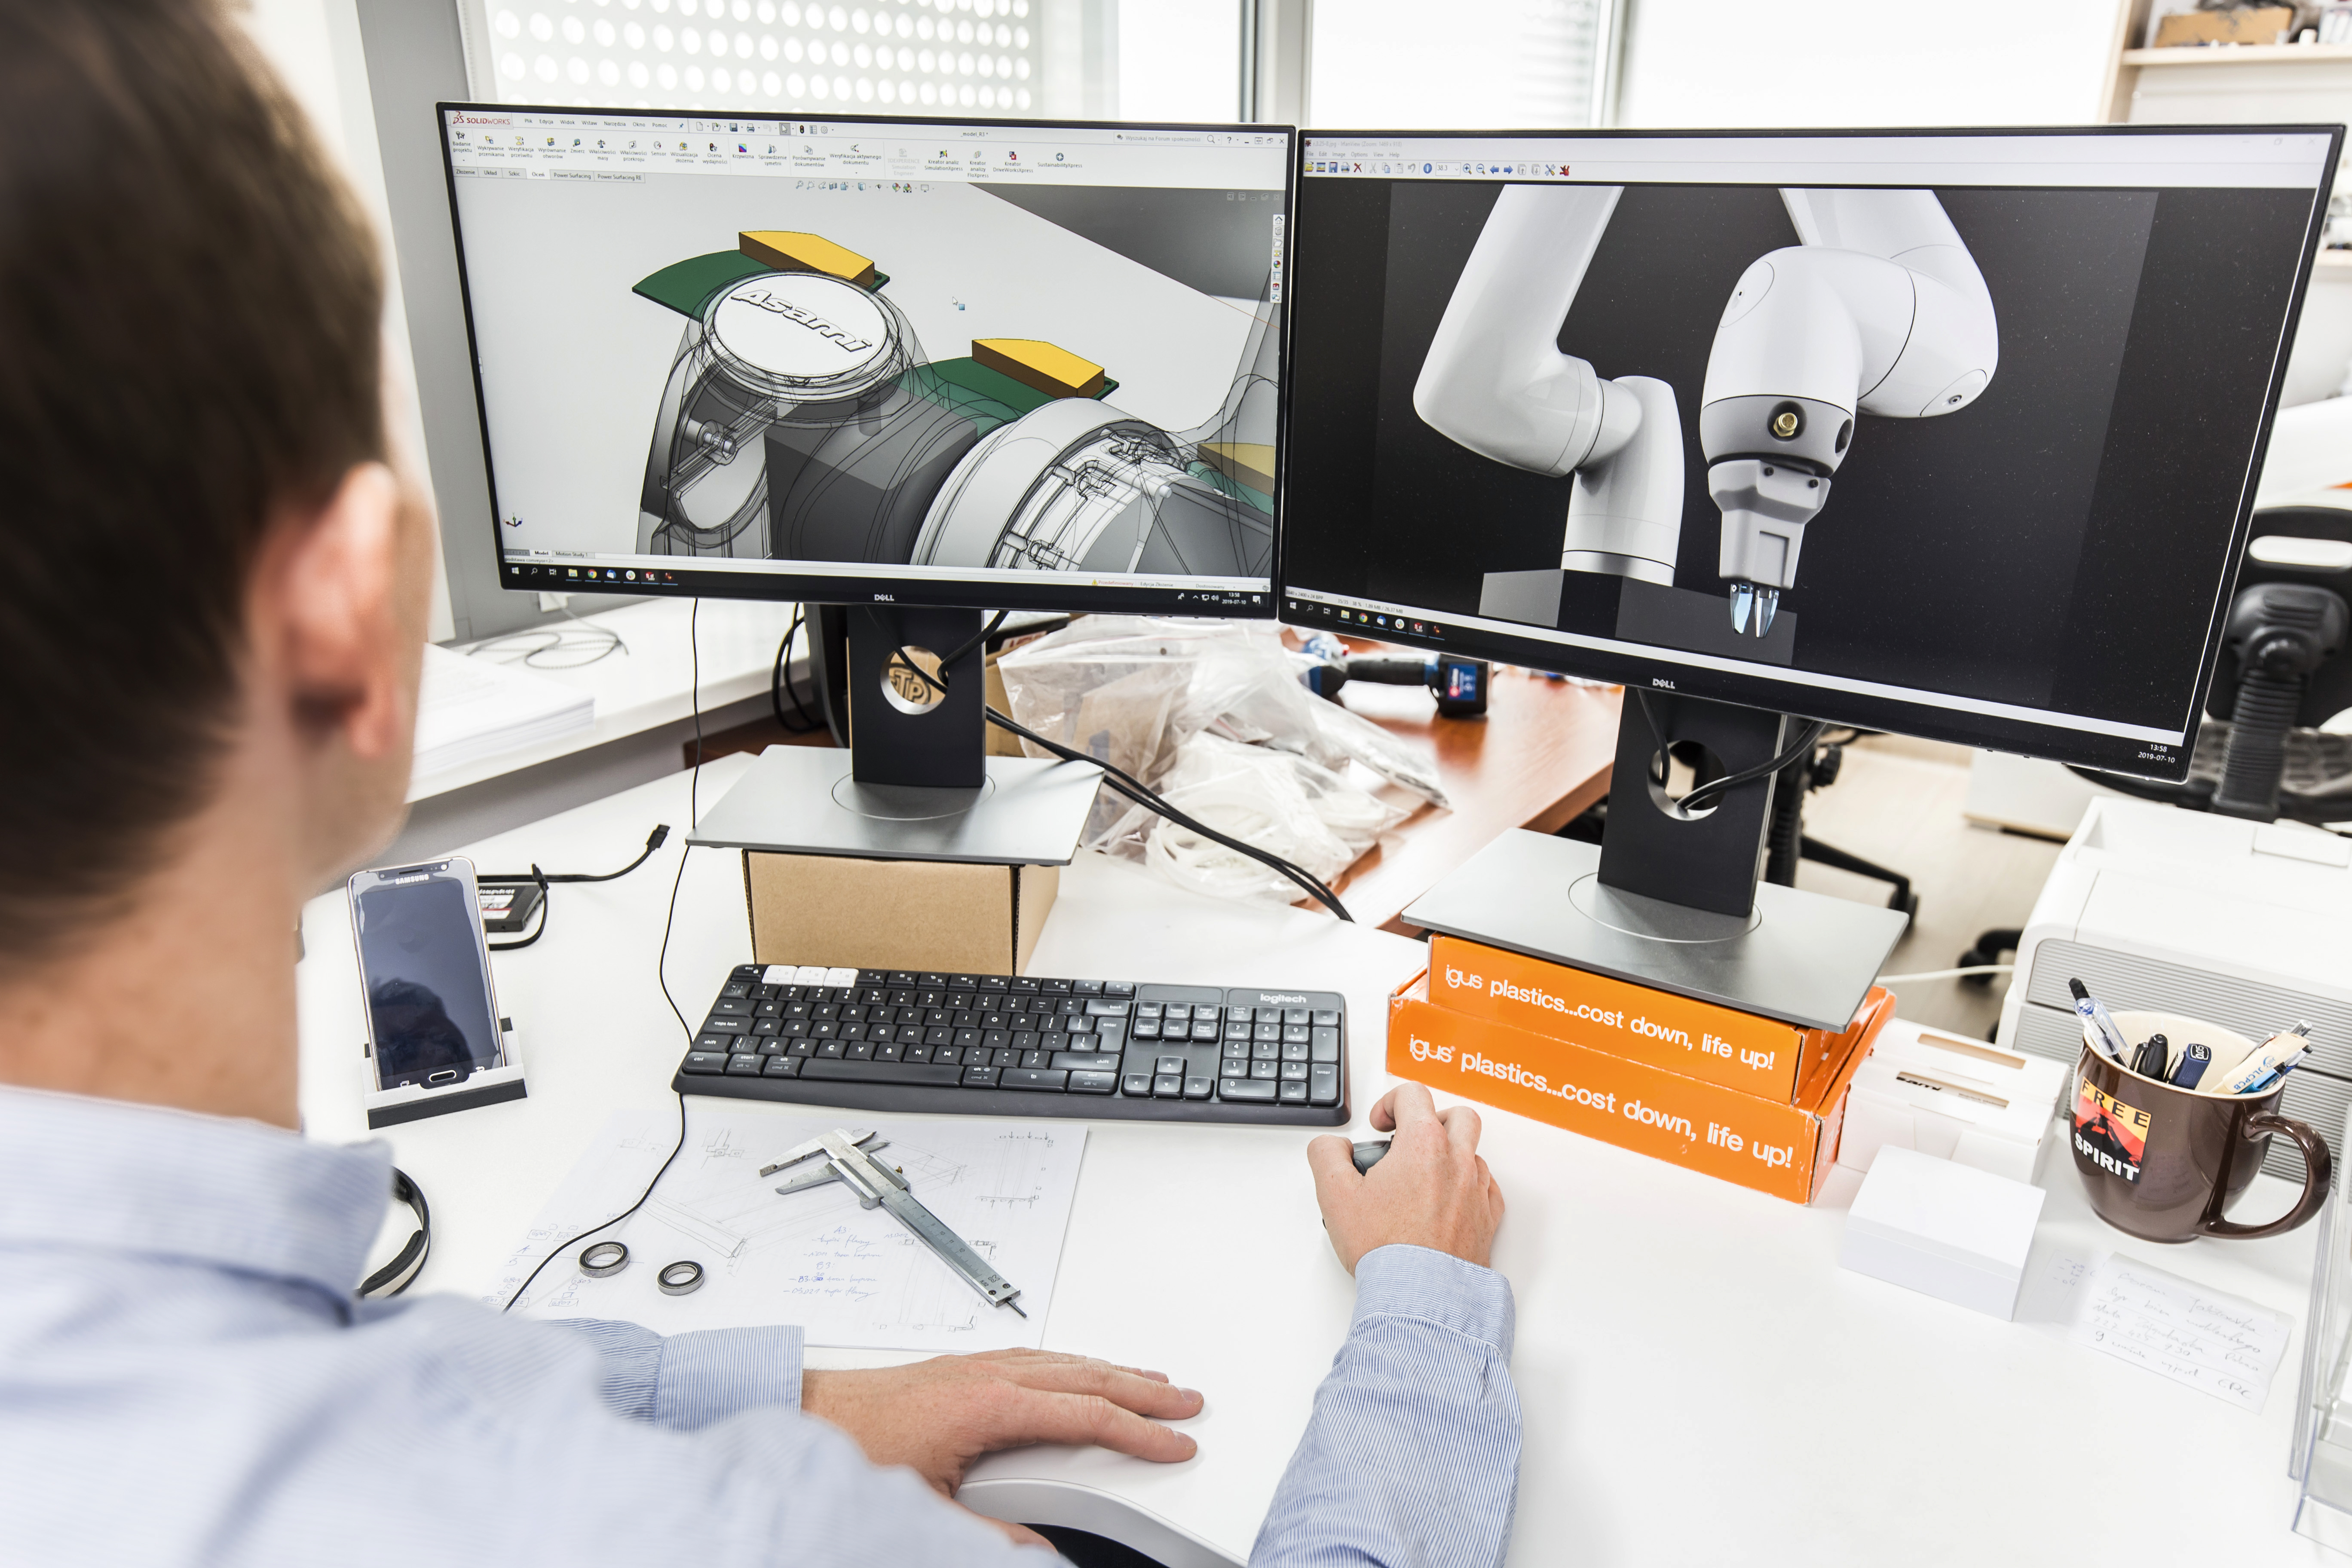 A man next to two monitors with cobots visible on them.